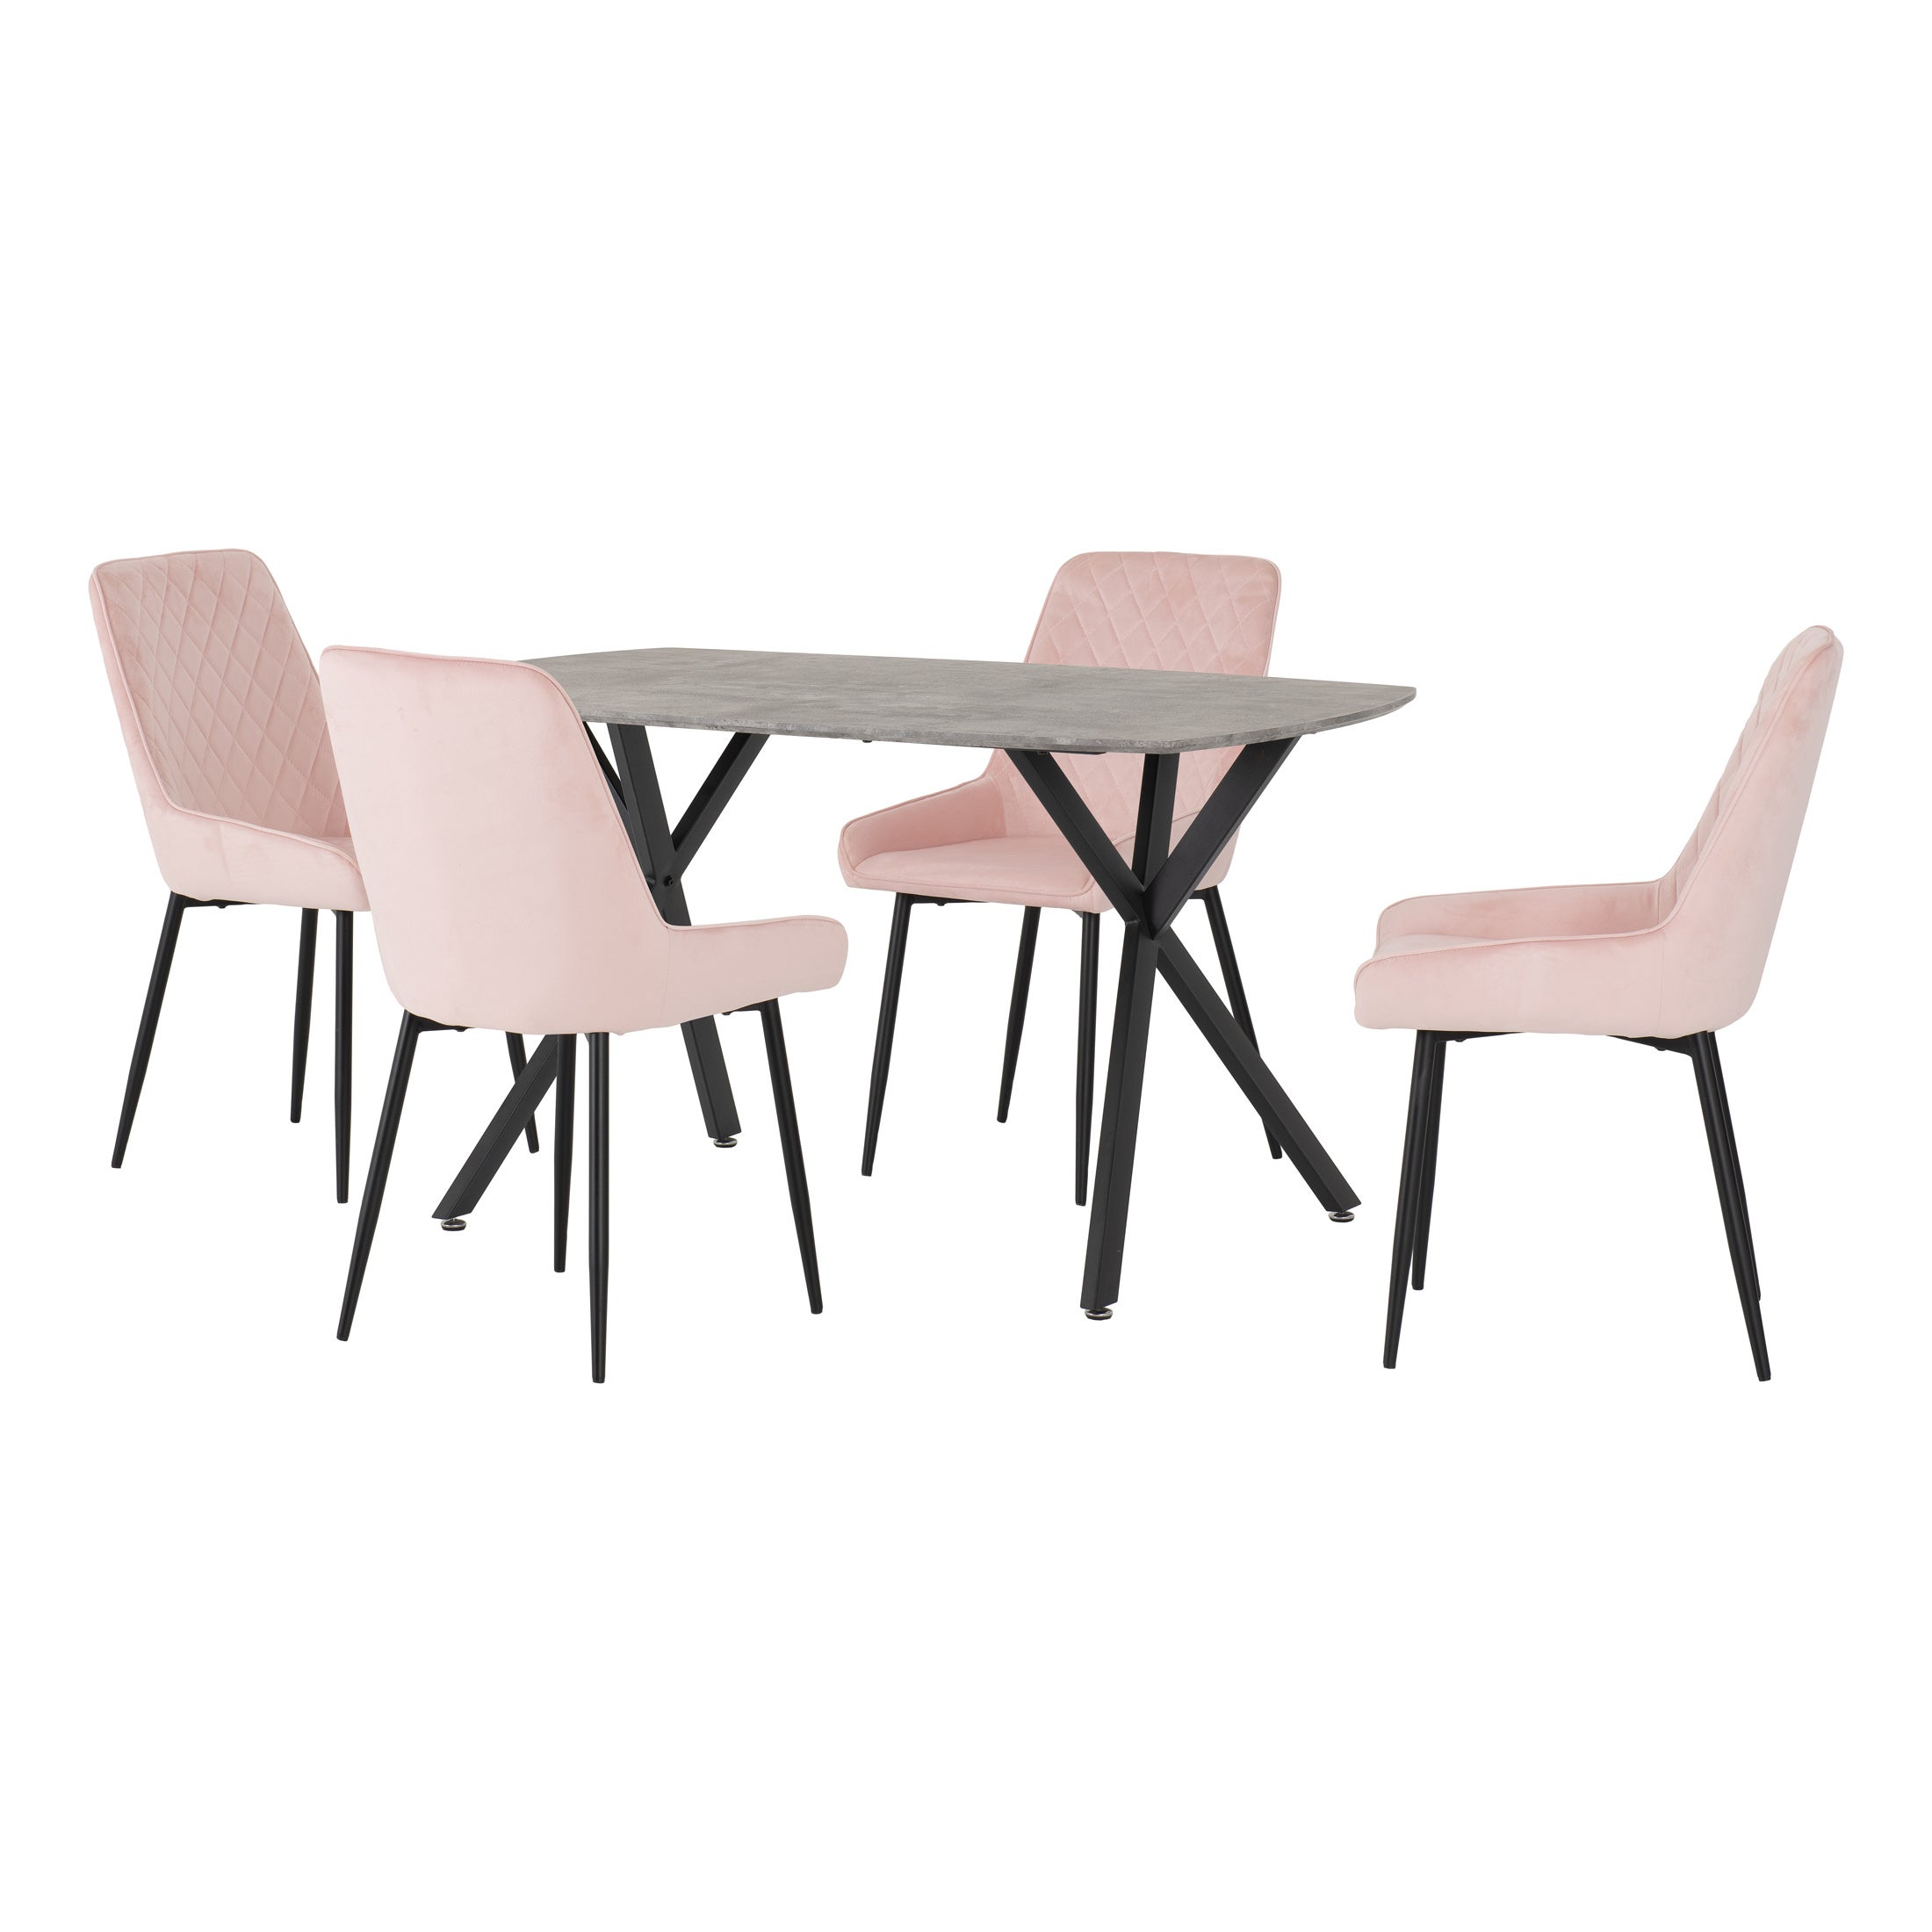 Athens Rectangular Dining Table With 4 Avery Chairs Concrete Effect Pink